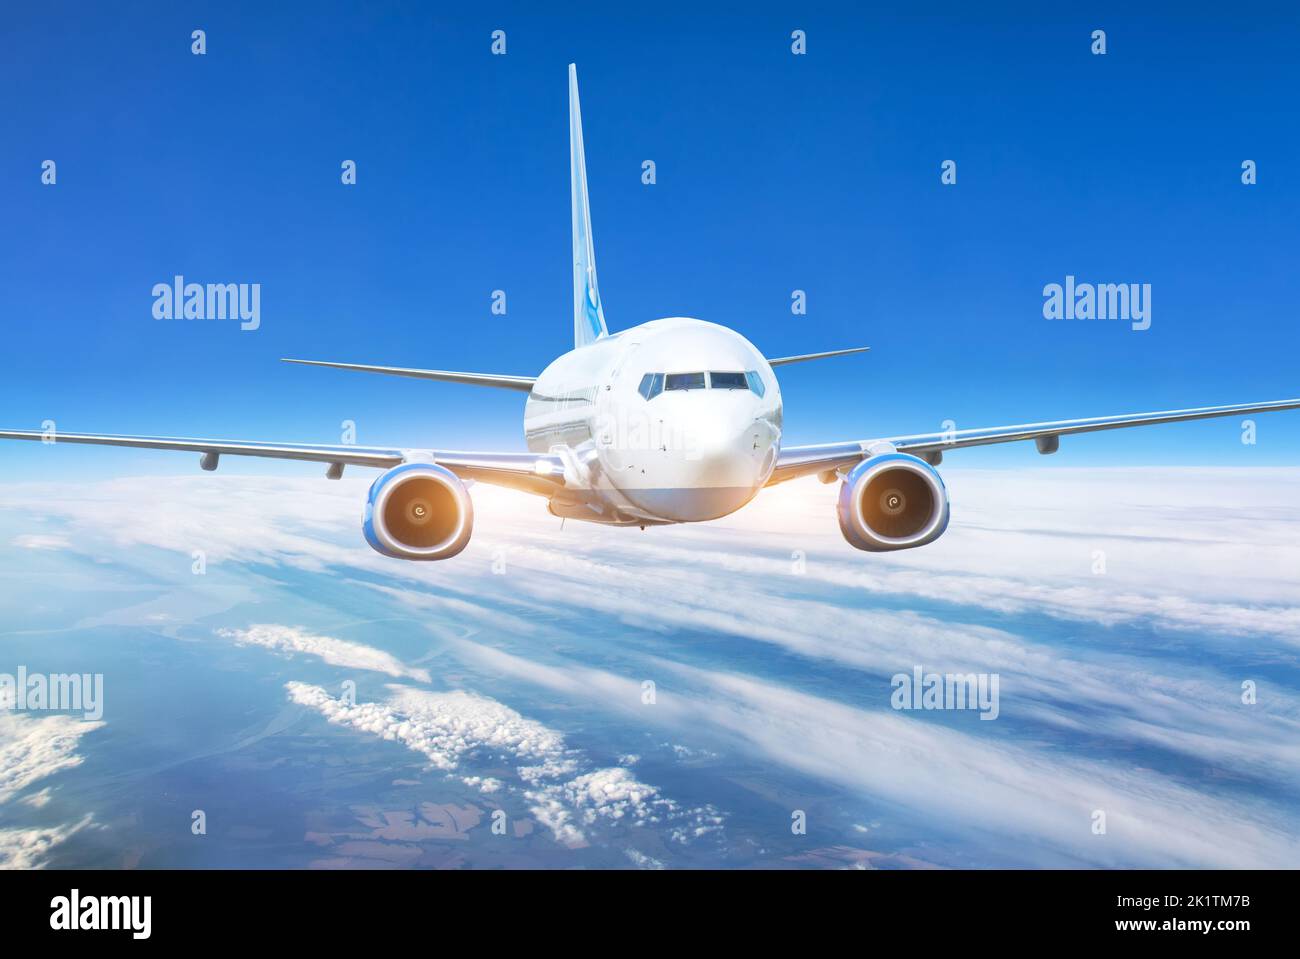 Passenger jet plane in the blue sky. Aircraft flying high through the cumulus clouds. Close up view airplane in flight. Stock Photo